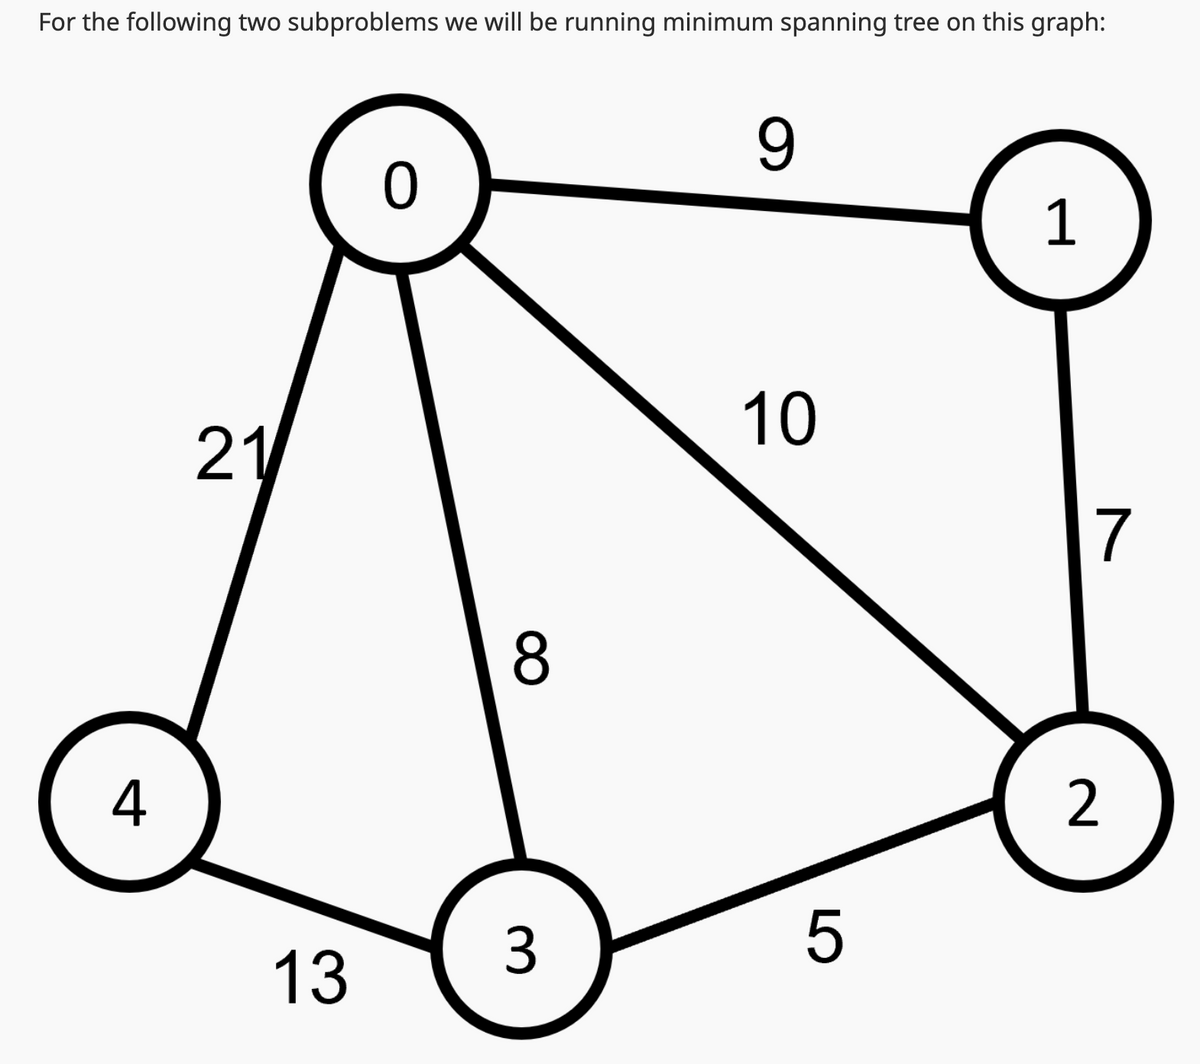 For the following two subproblems we will be running minimum spanning tree on this graph:
4
21
13
0
8
3
9
10
5
1
7
2